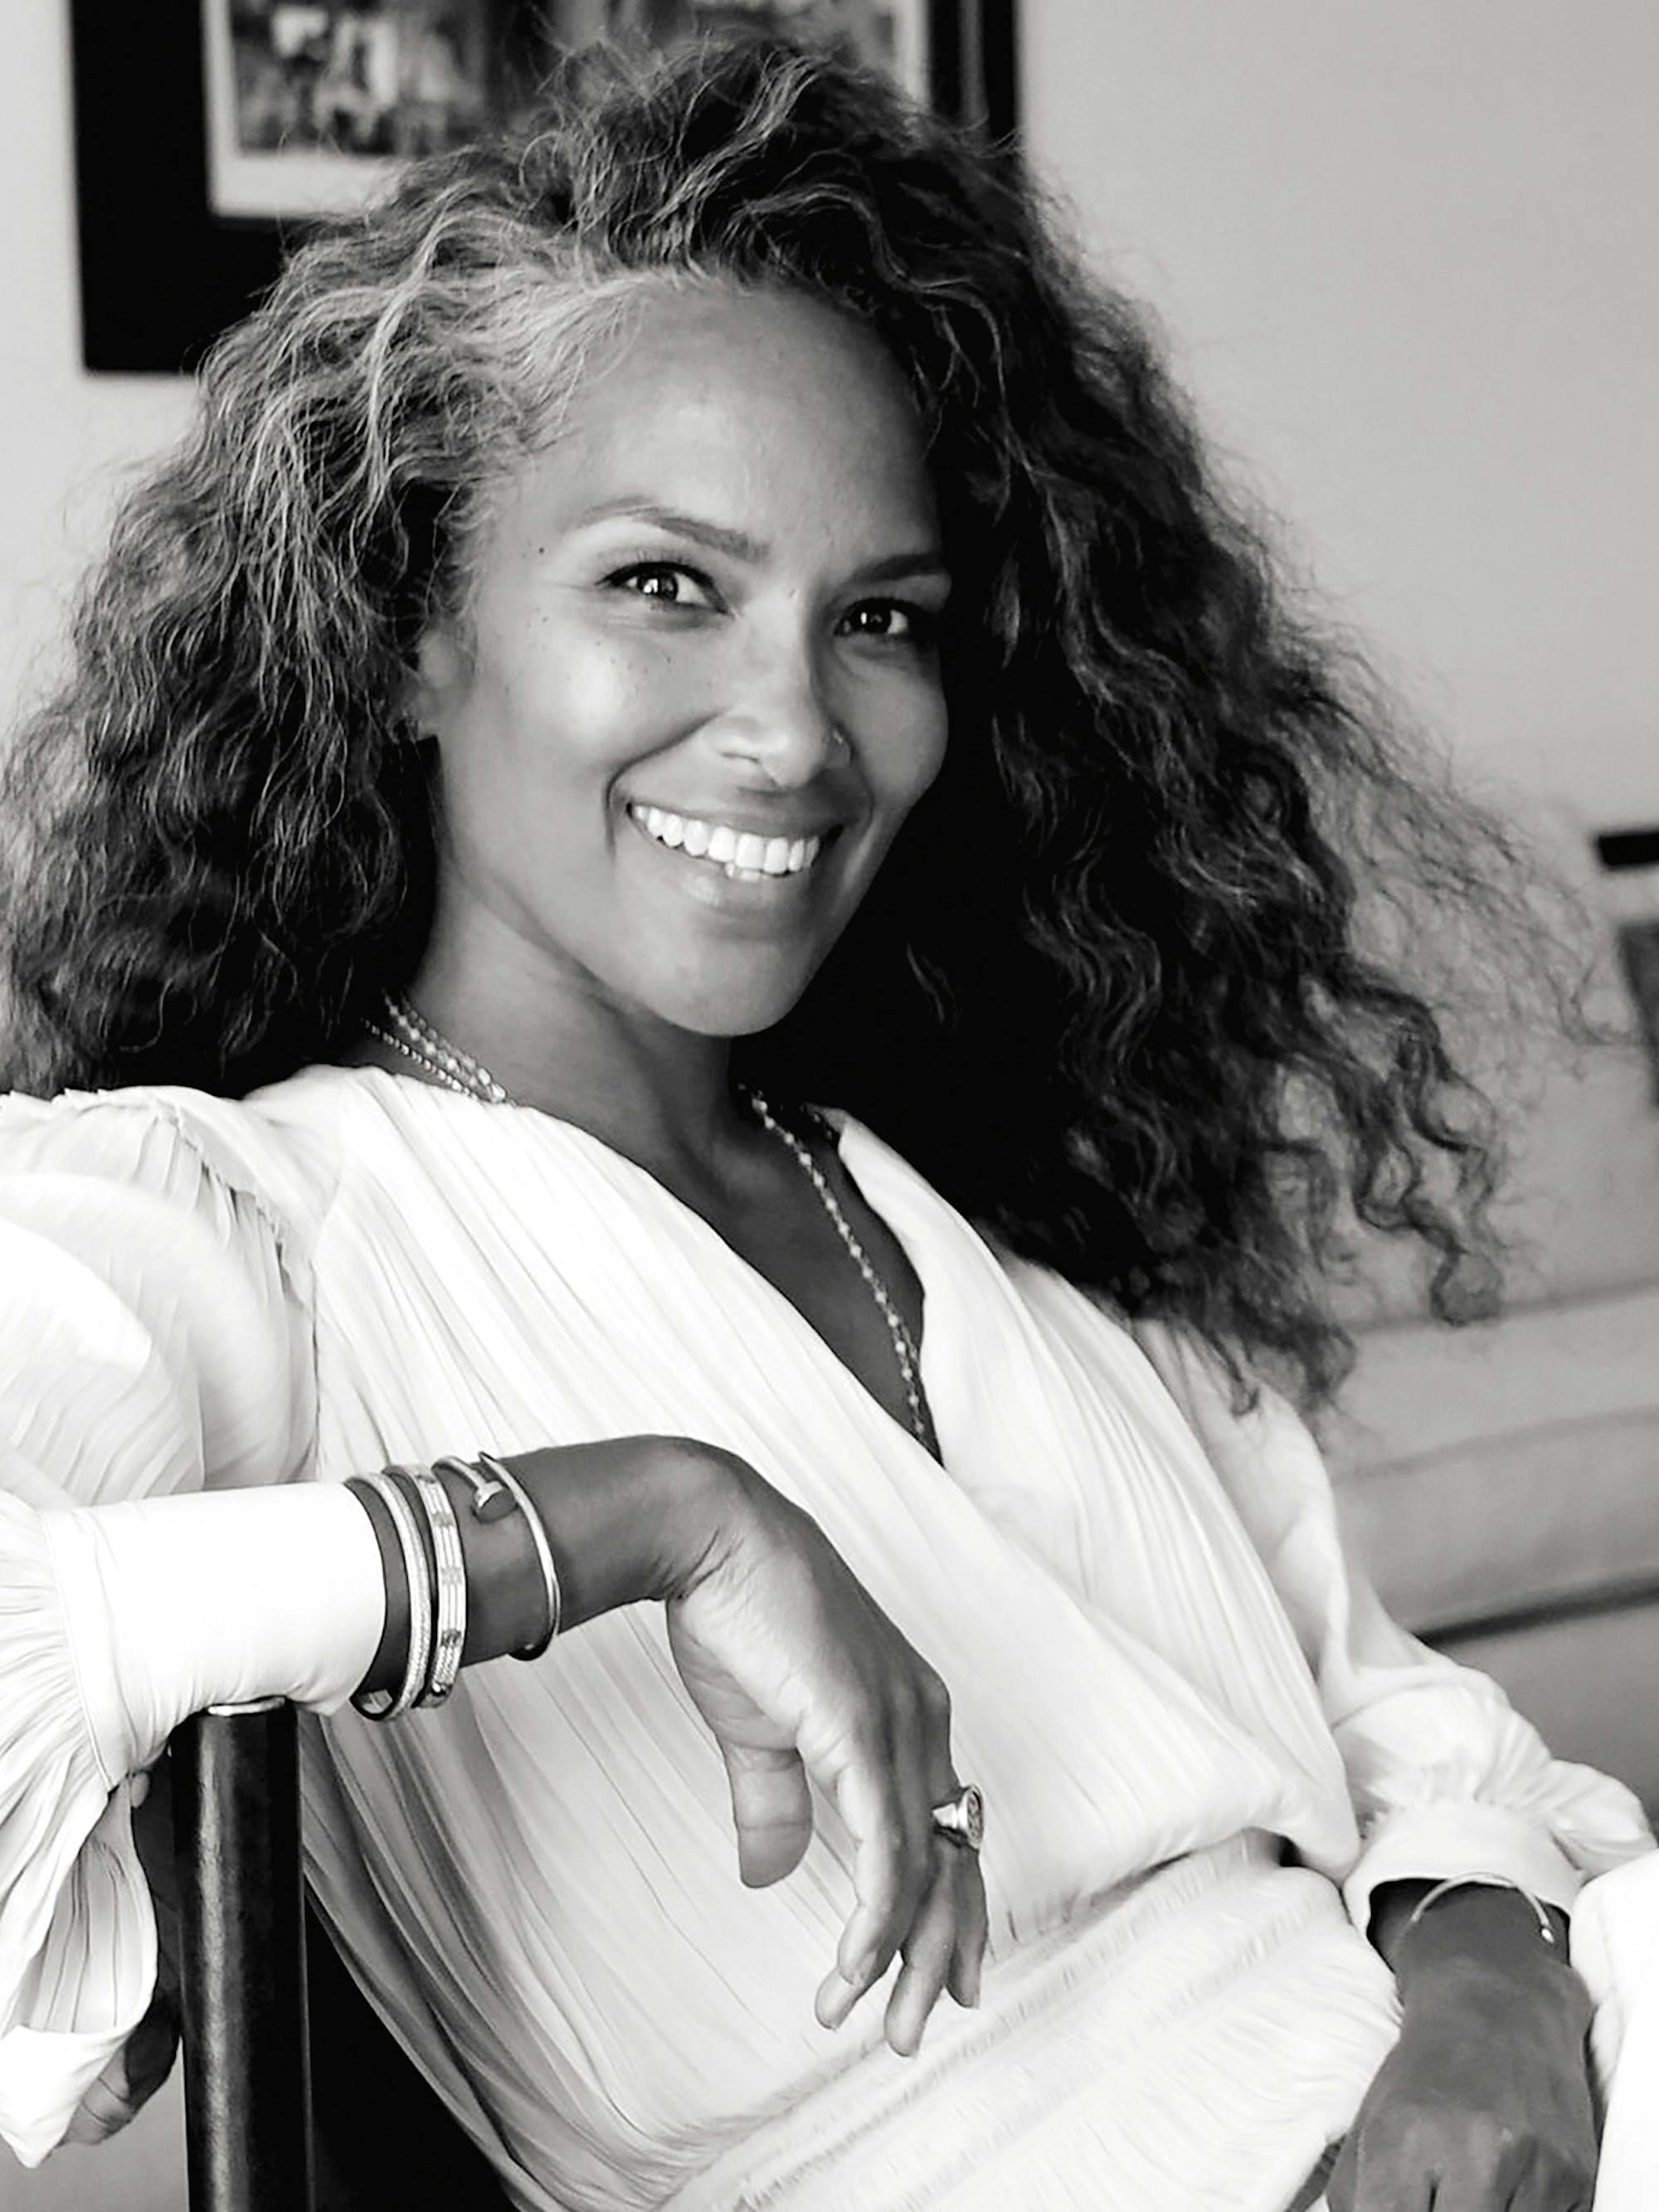 Mara Brock Akil wears a white shirt and necklace and smiles widely.